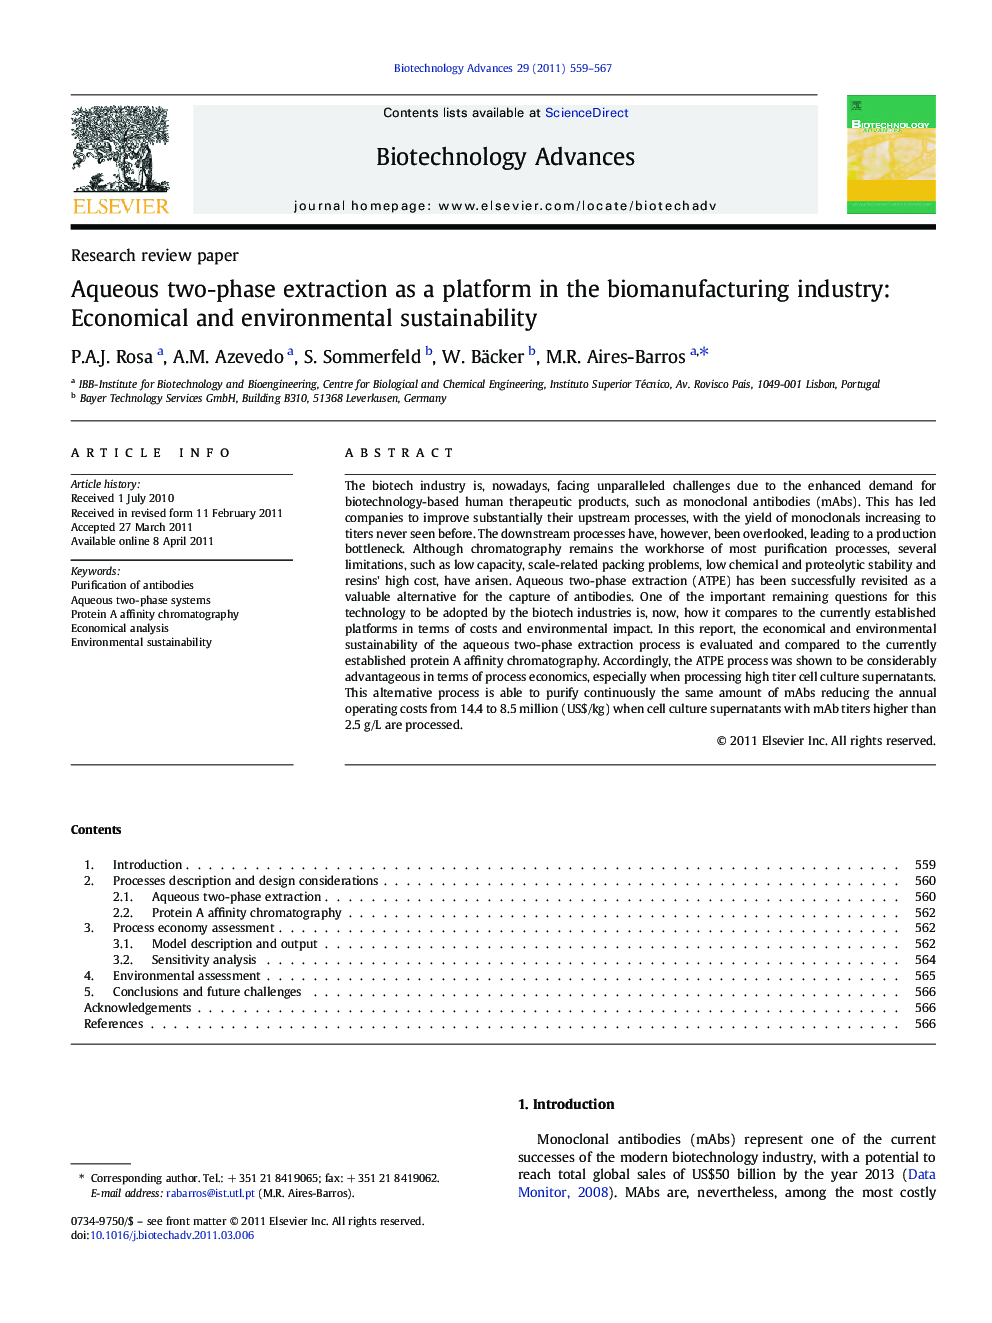 Aqueous two-phase extraction as a platform in the biomanufacturing industry: Economical and environmental sustainability